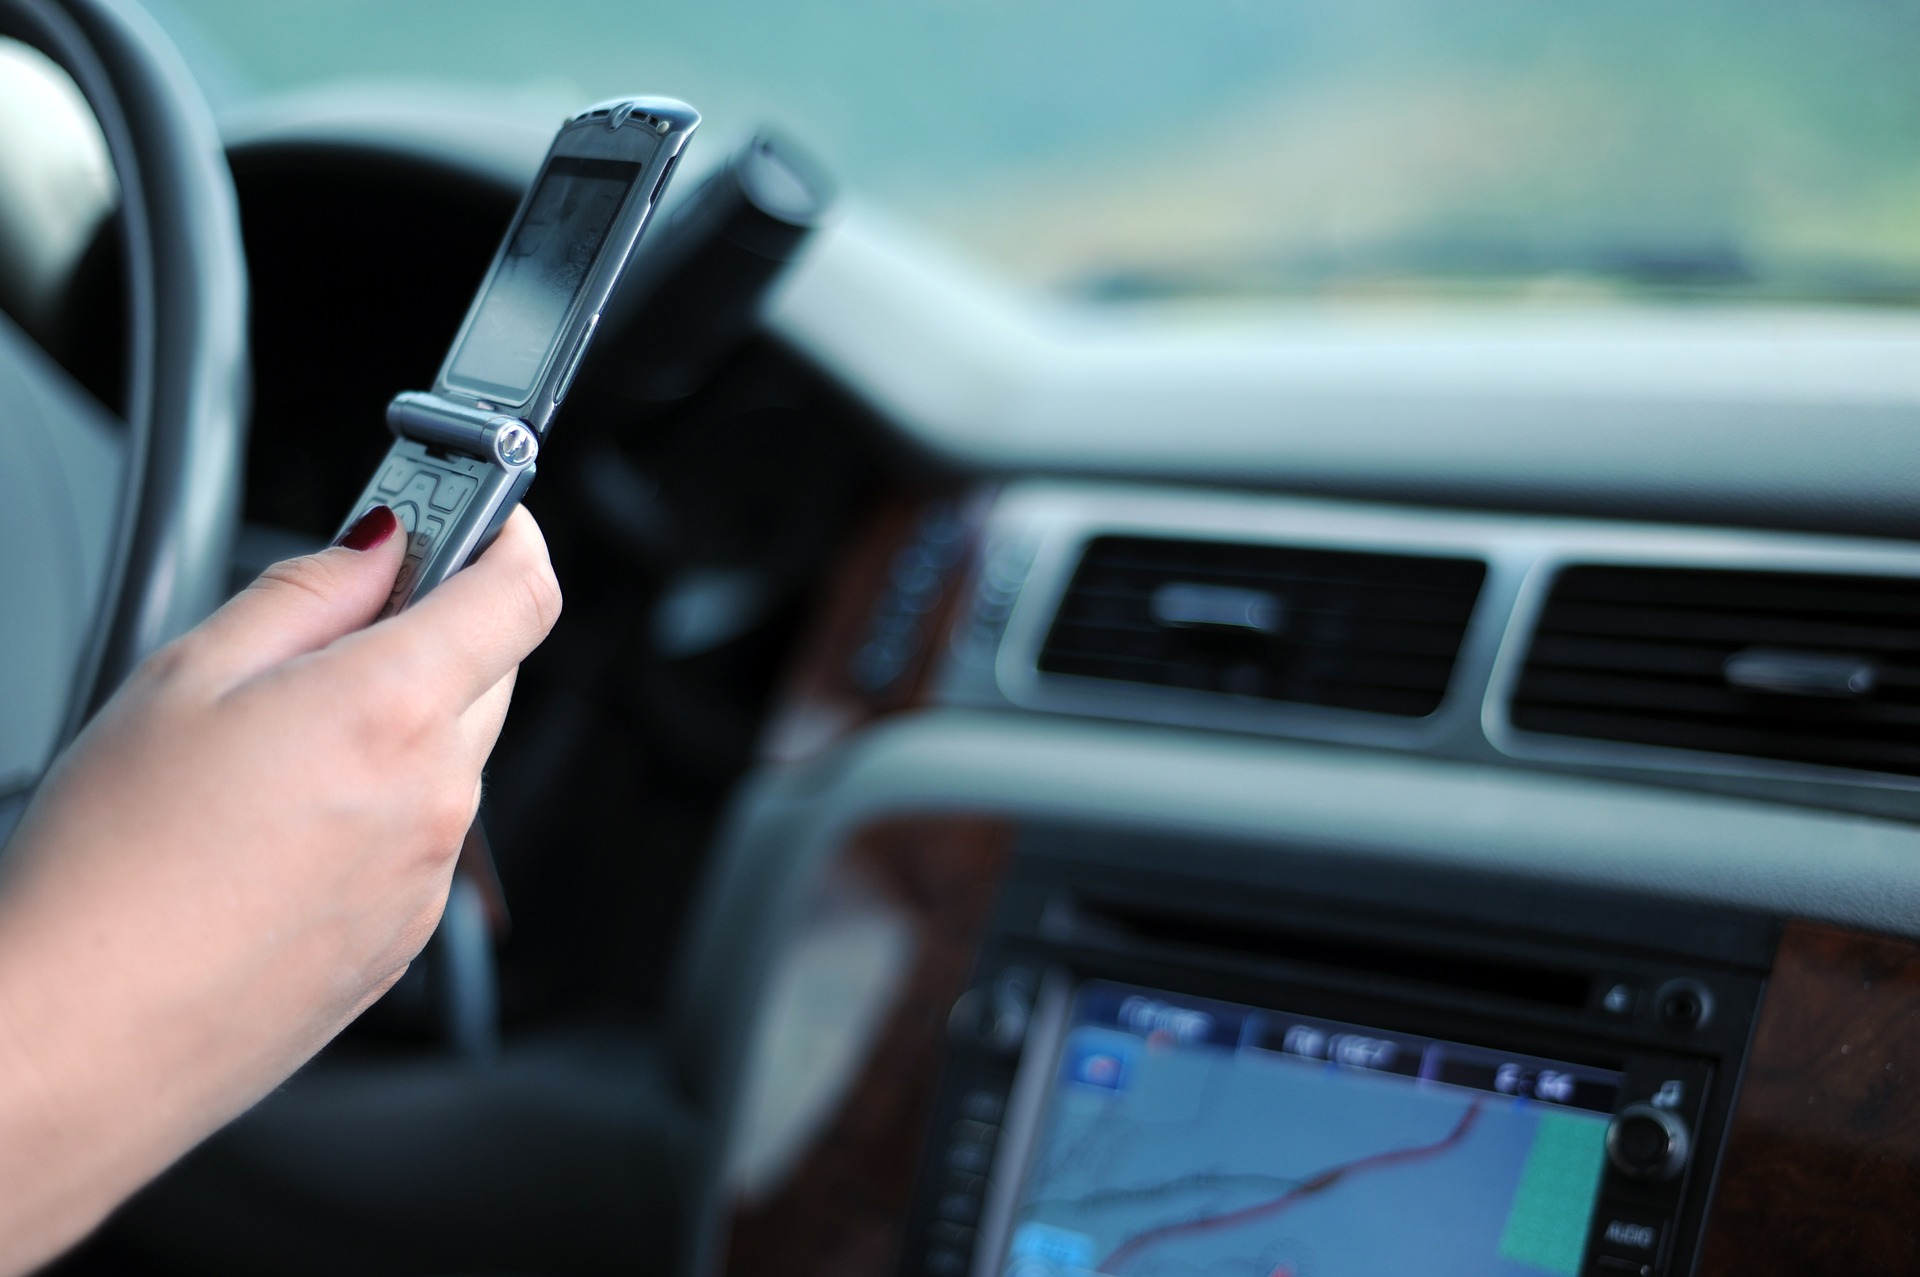 Mobile phone while driving: 100% of Irish caught drivers in the act